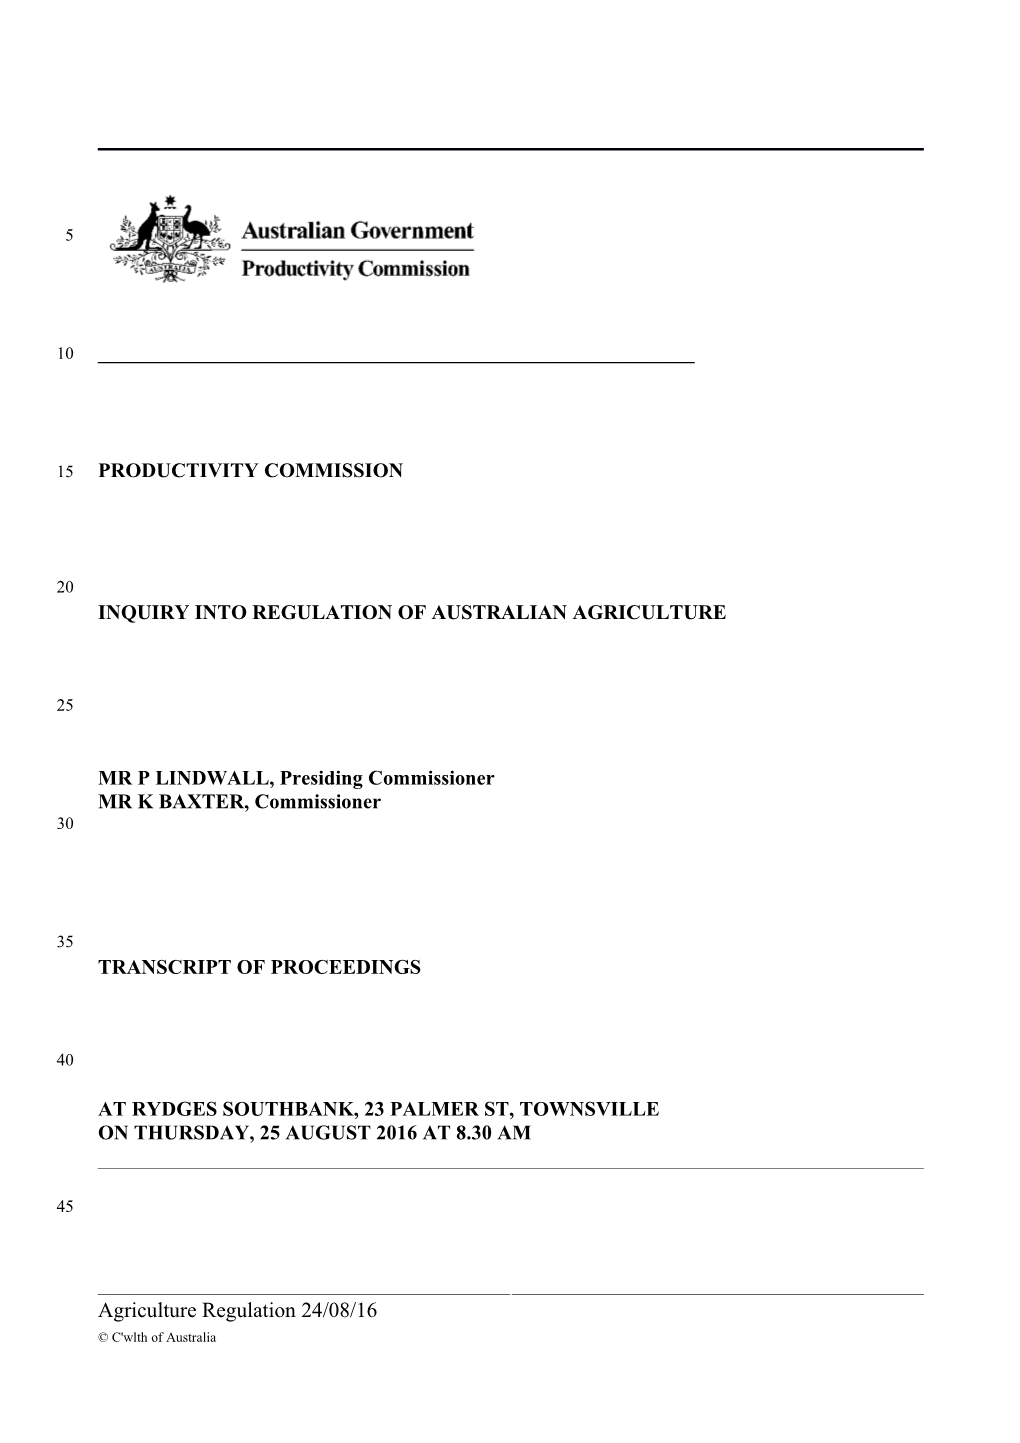 25 August 2016 - Townsville Public Hearing Transcript - Regulation of Agriculture